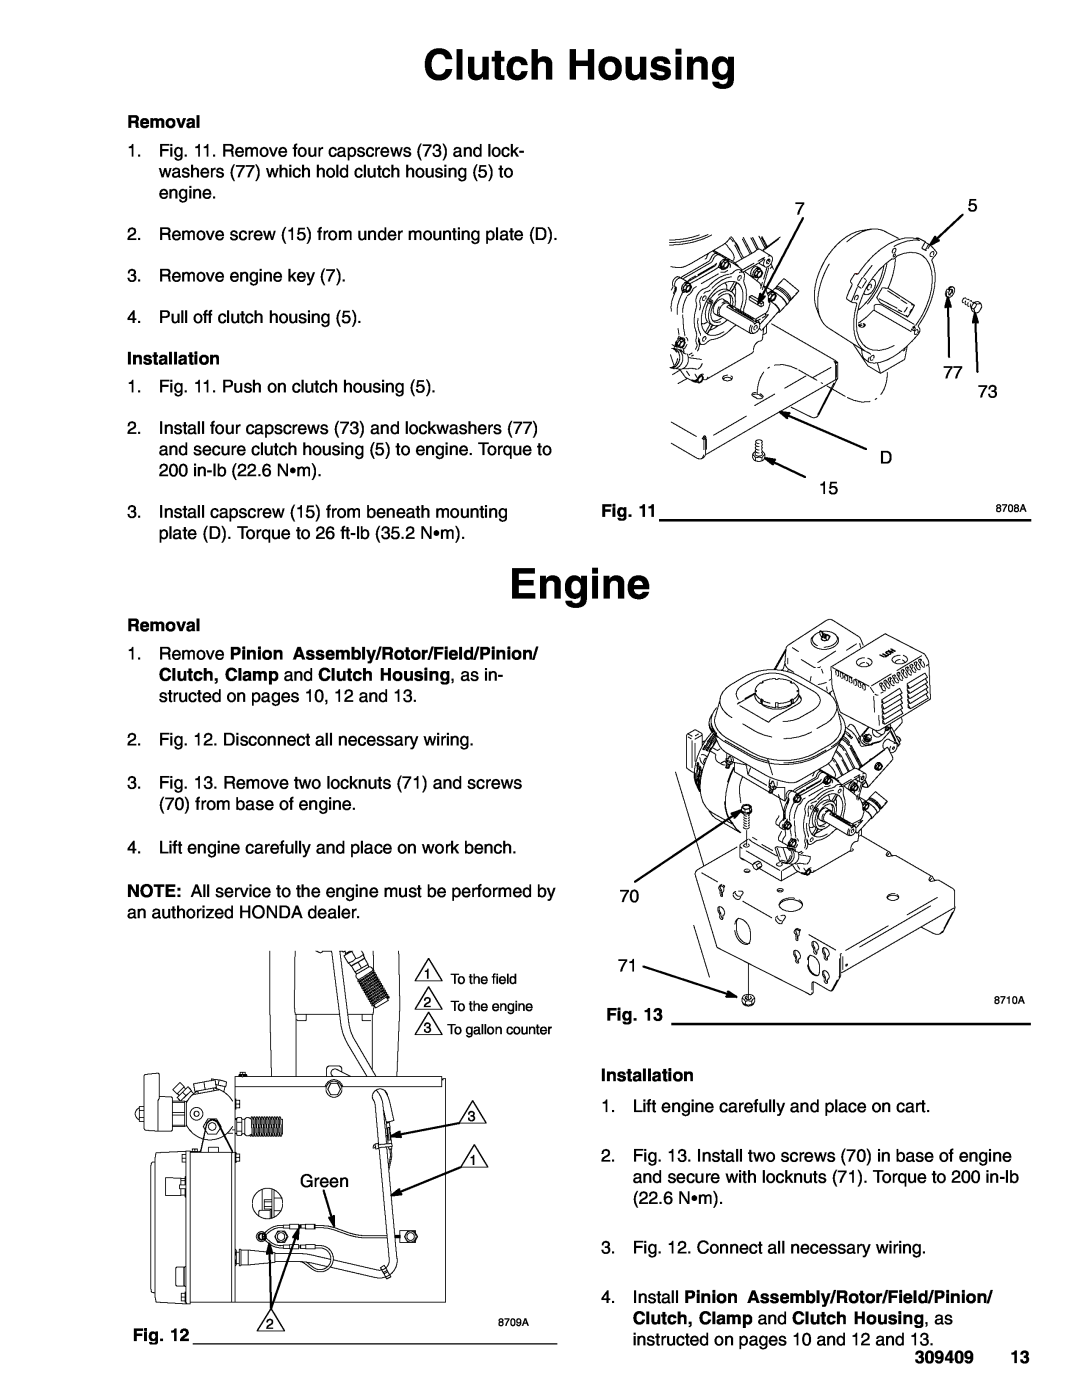 Graco Inc 233706, 233702, 233701, 233700, 309409E, 5900HD, 3900, 233717 Clutch Housing, Engine, Removal, Installation 